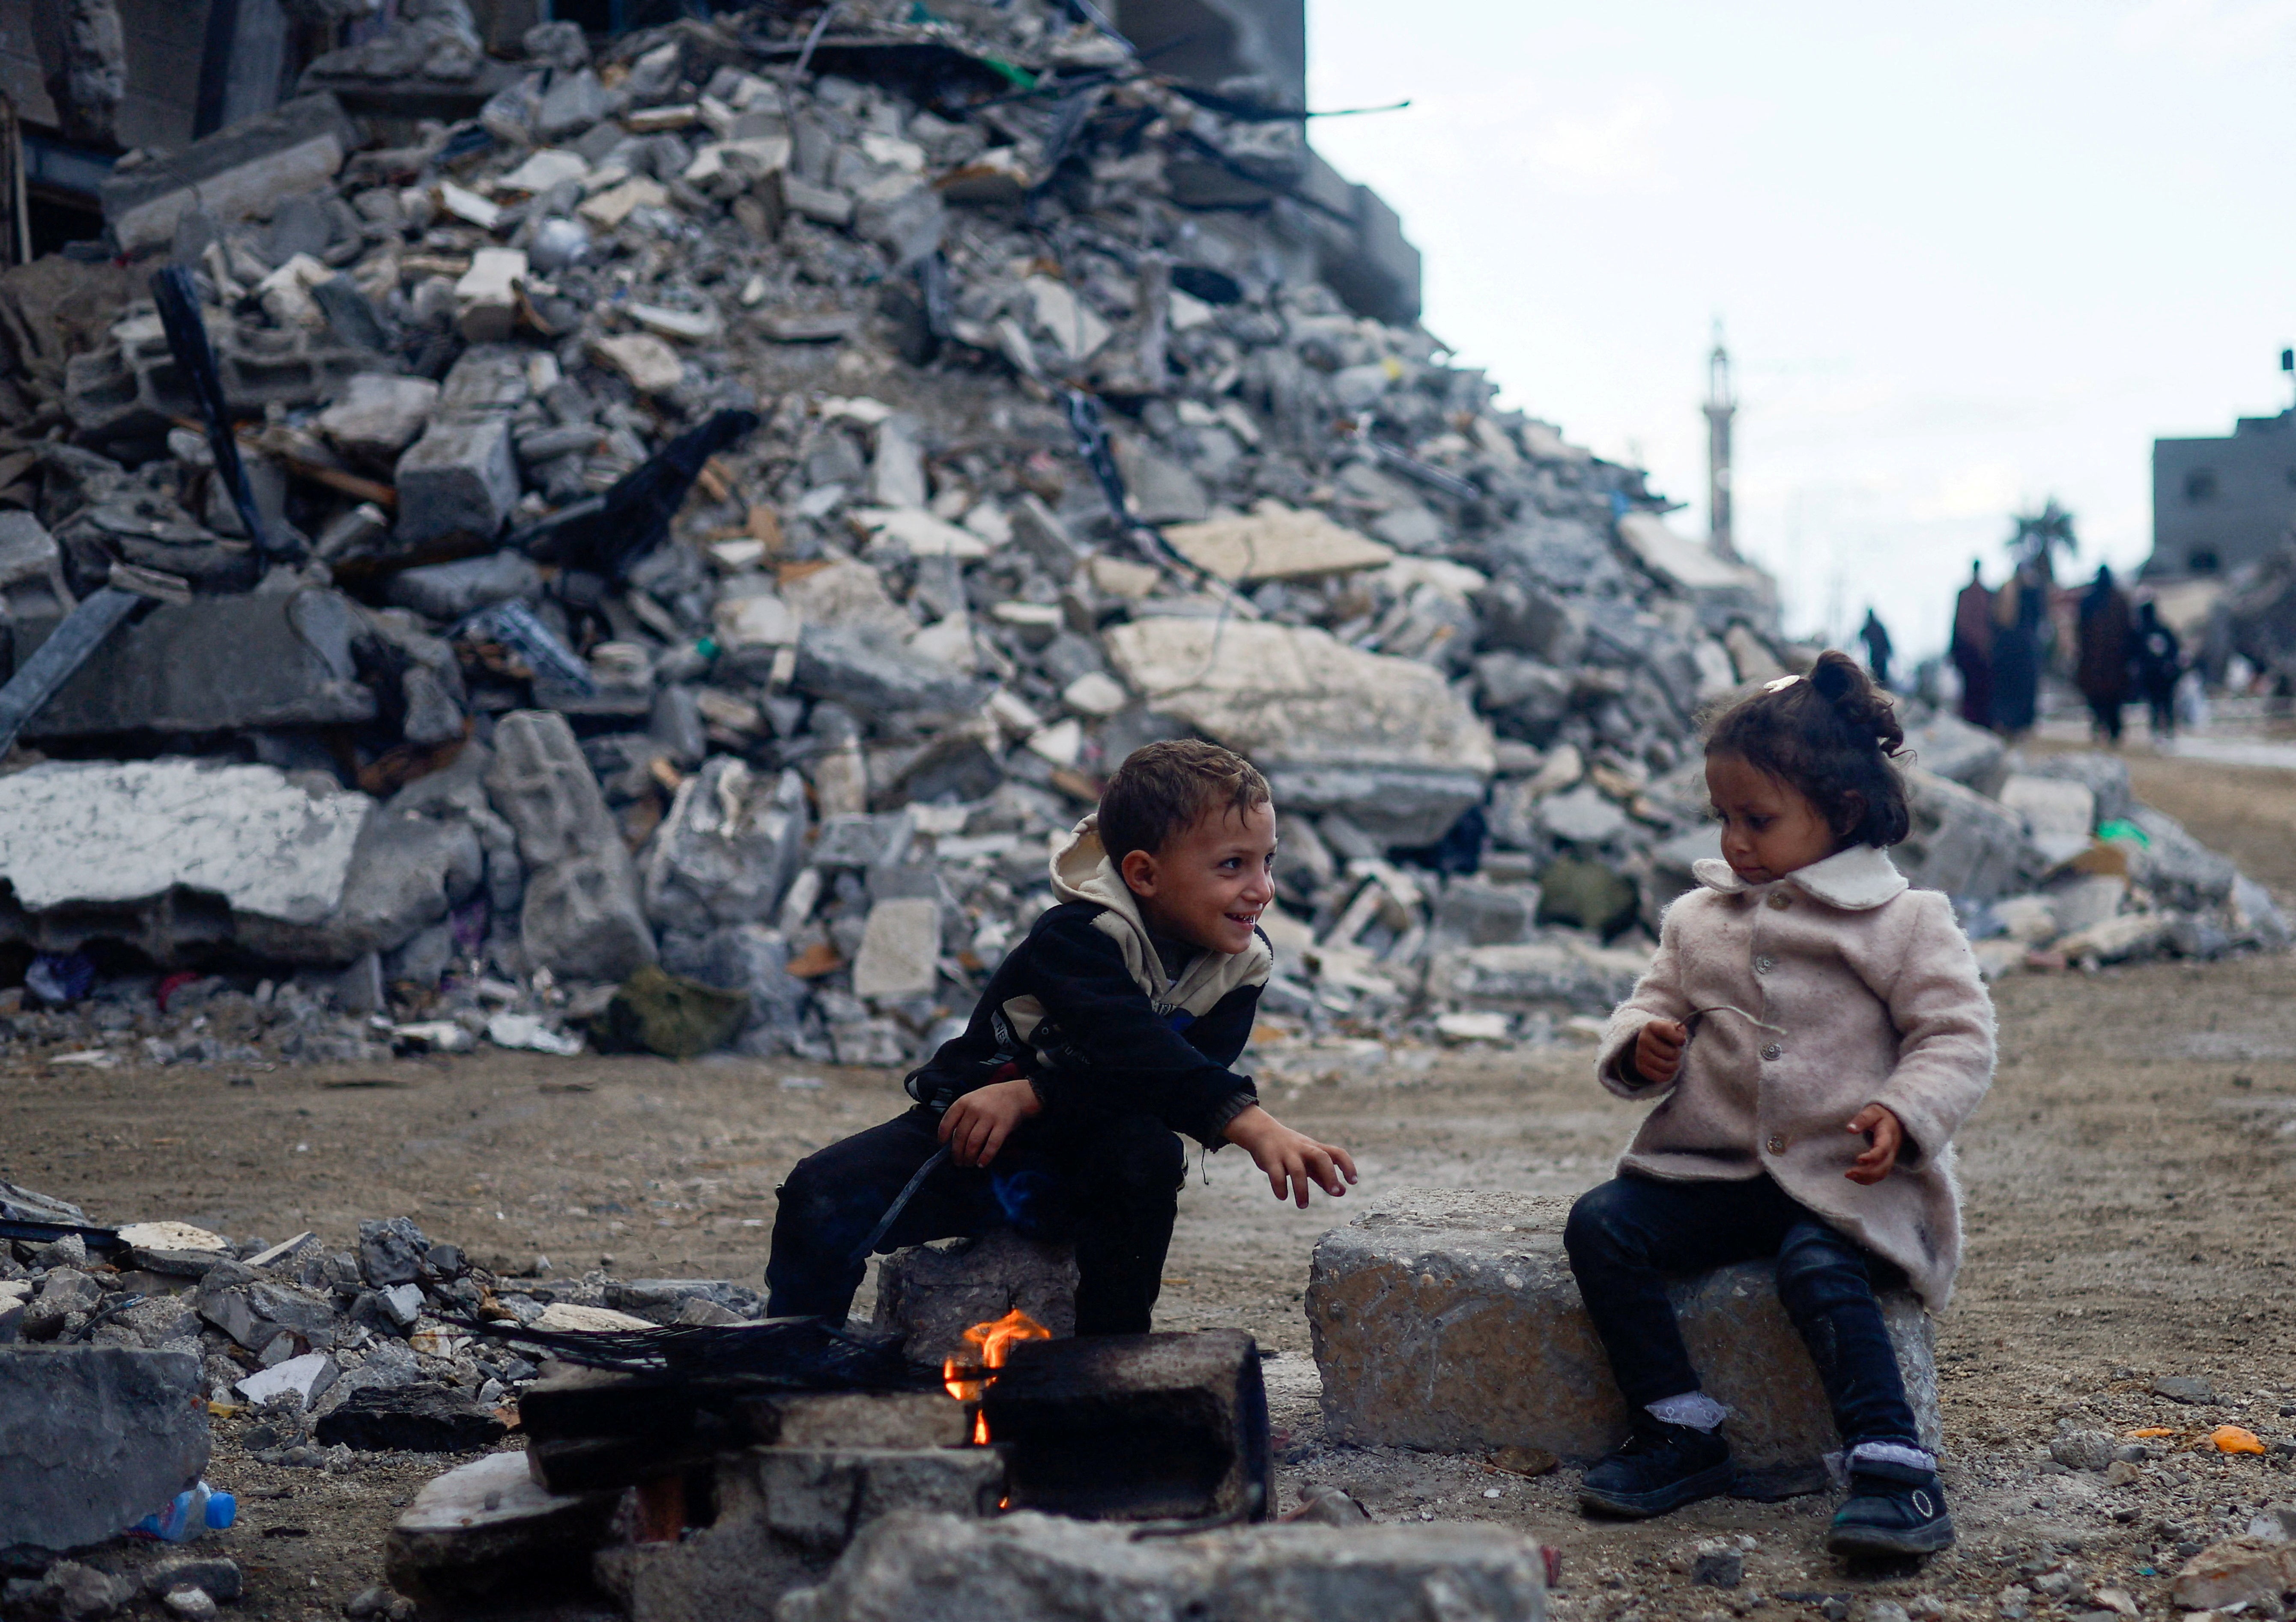 Palestinian children sit by the fire next to the rubble of a house, in Khan Younis